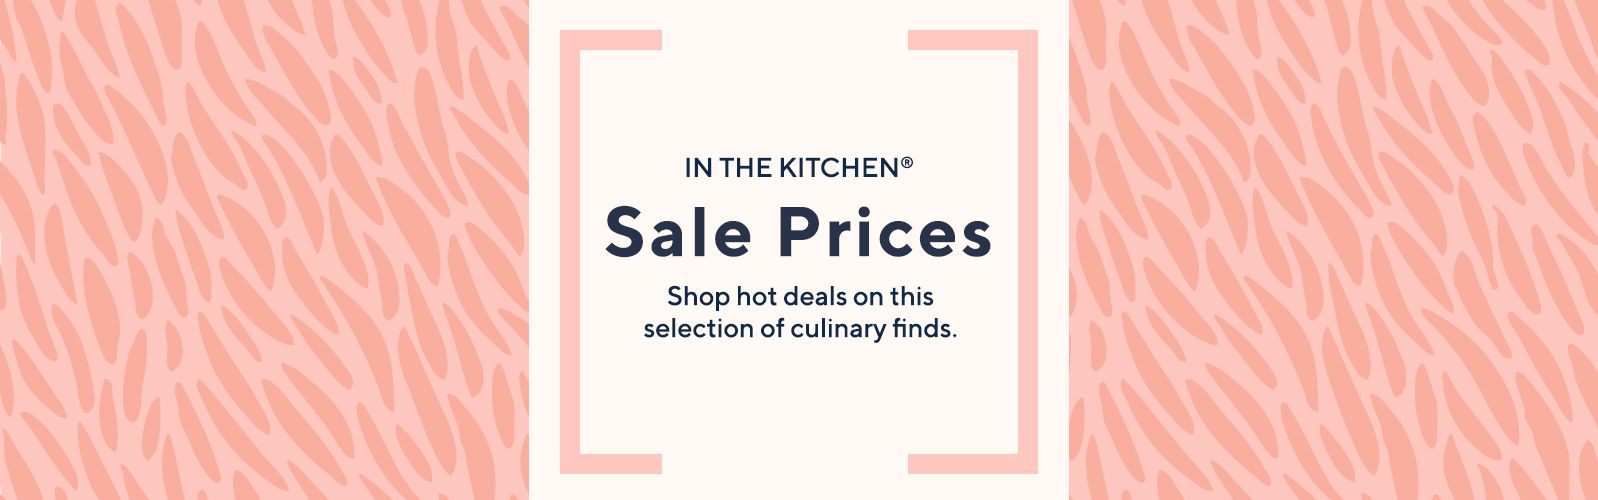 In the Kitchen® Sale Prices Shop hot deals on this selection of culinary finds. 